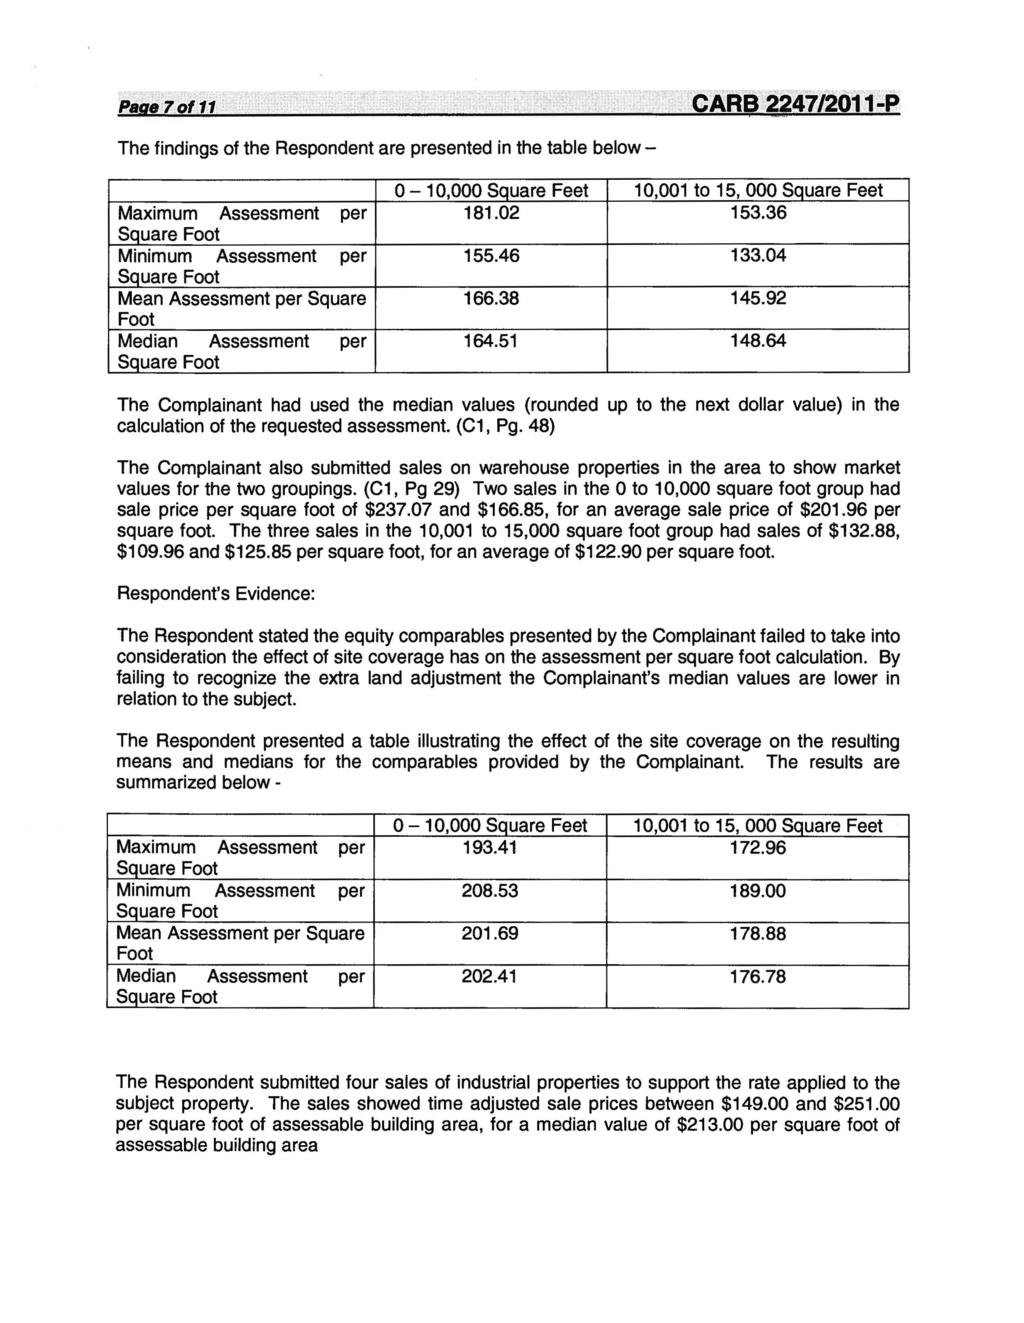 Page 7of11 The findings of the Respondent are presented in the table below- 0-10,000 Square Feet 10,001 to 15, 000 Square Feet Maximum Assessment per 181.02 153.36 Minimum Assessment per 155.46 133.